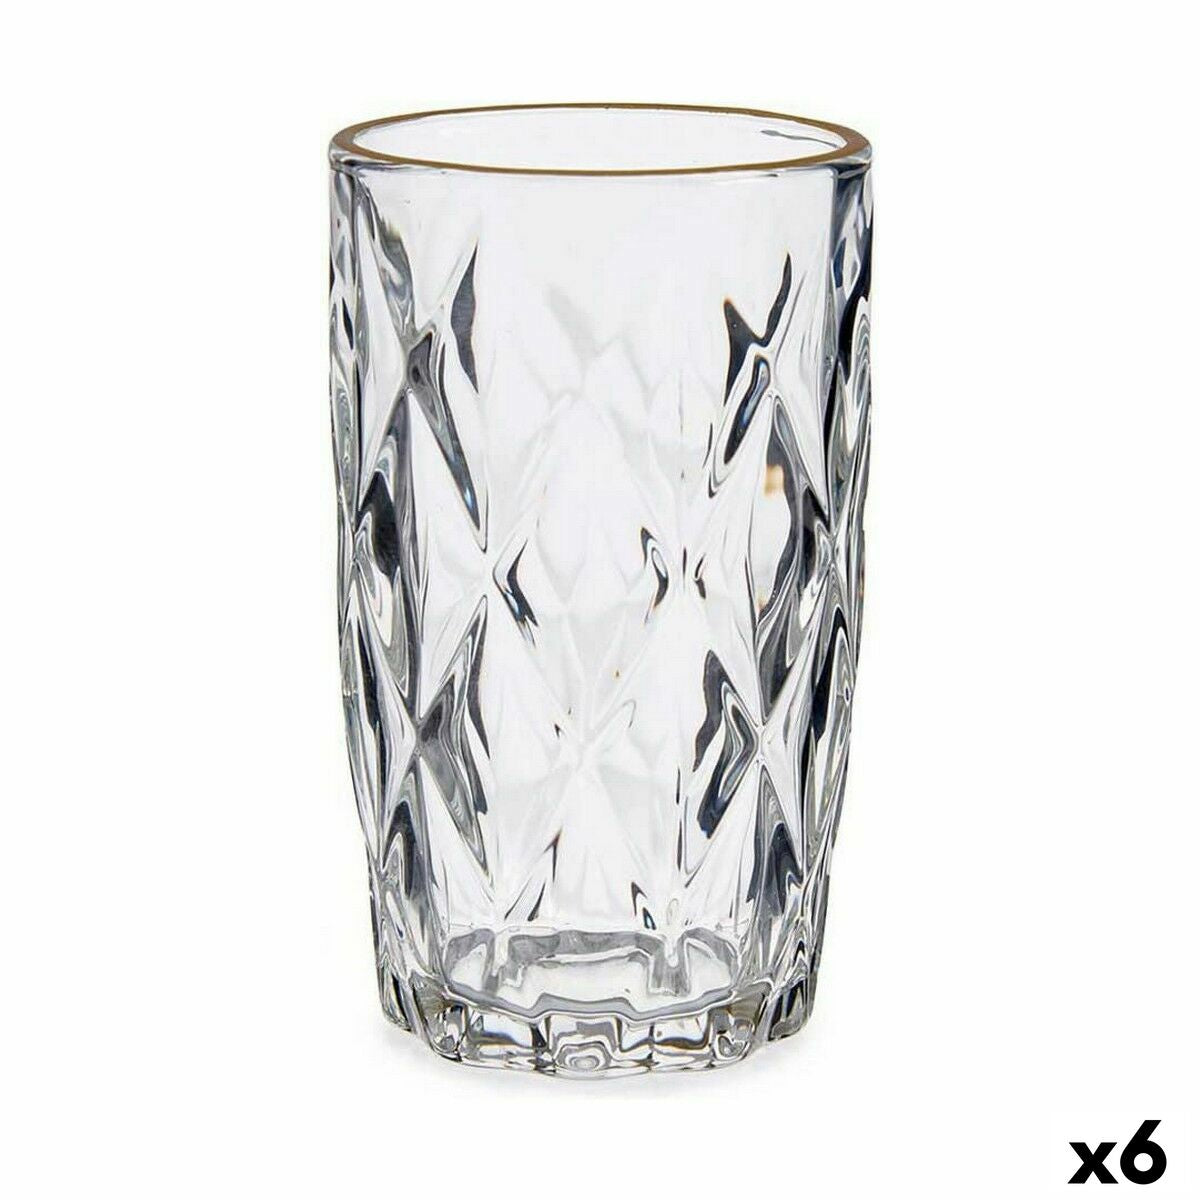 Transparent Glass with Golden Finish (340 ml)